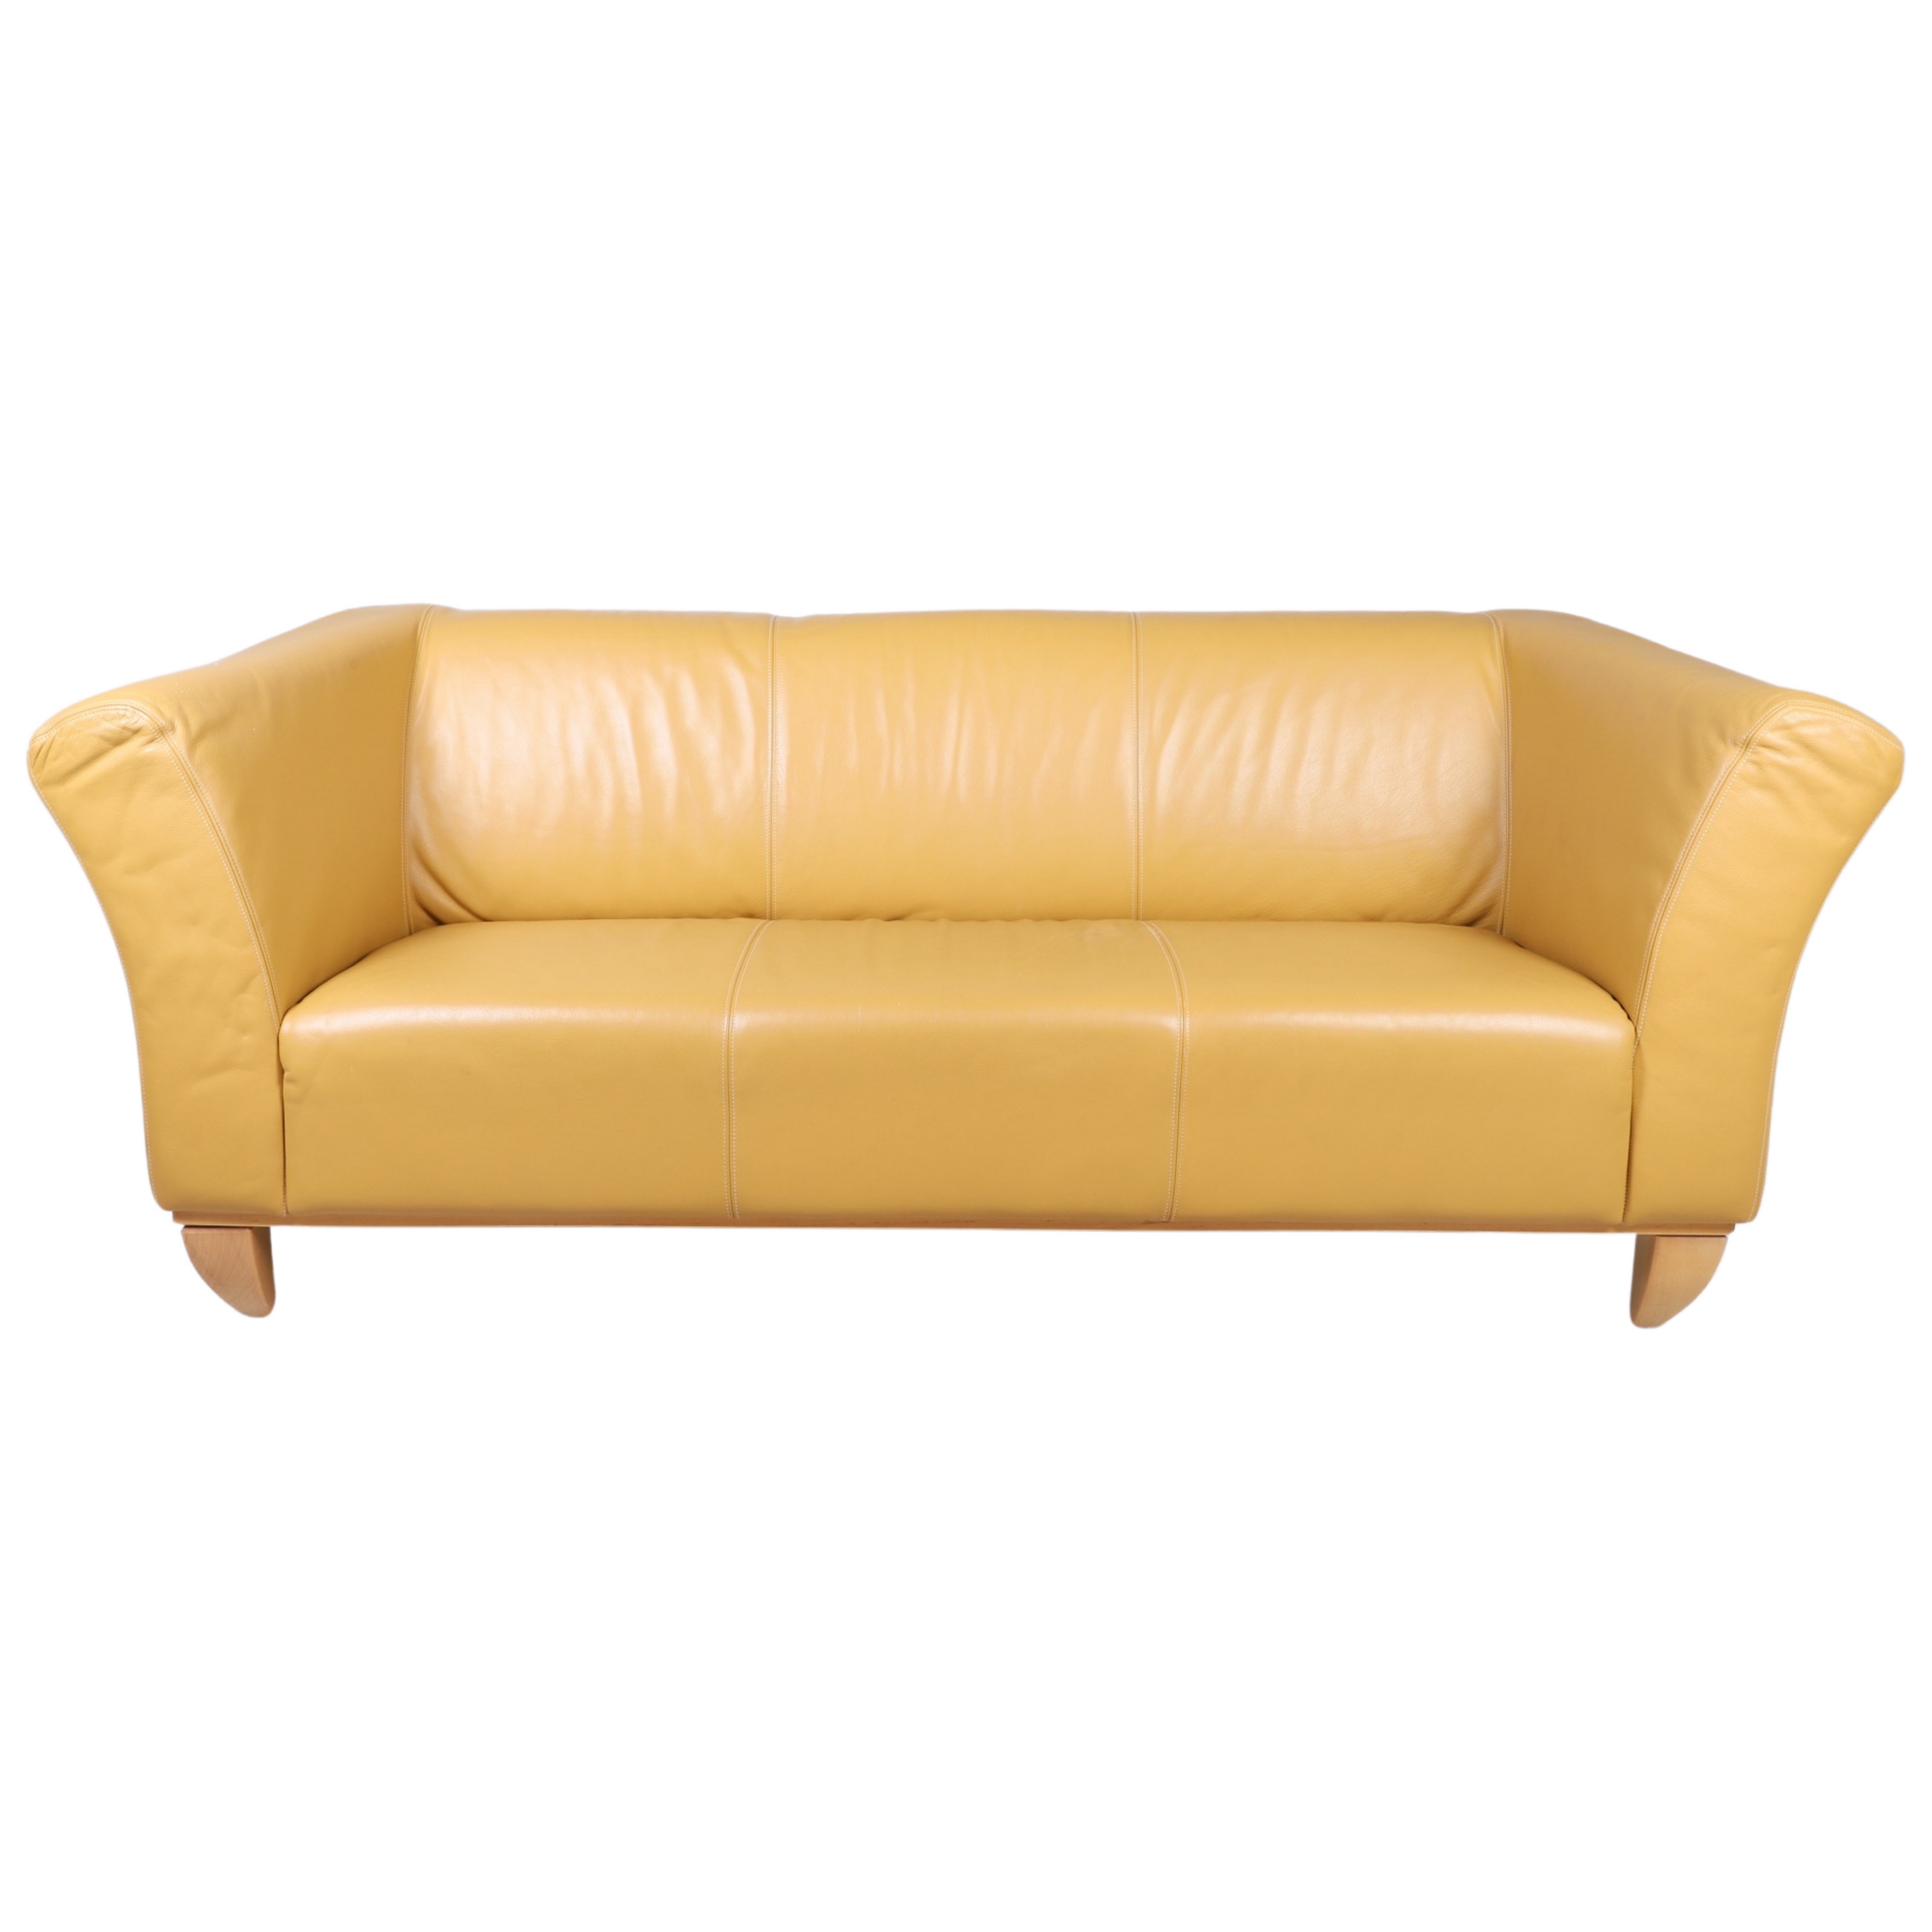 Contemporary stitched leather sofa,